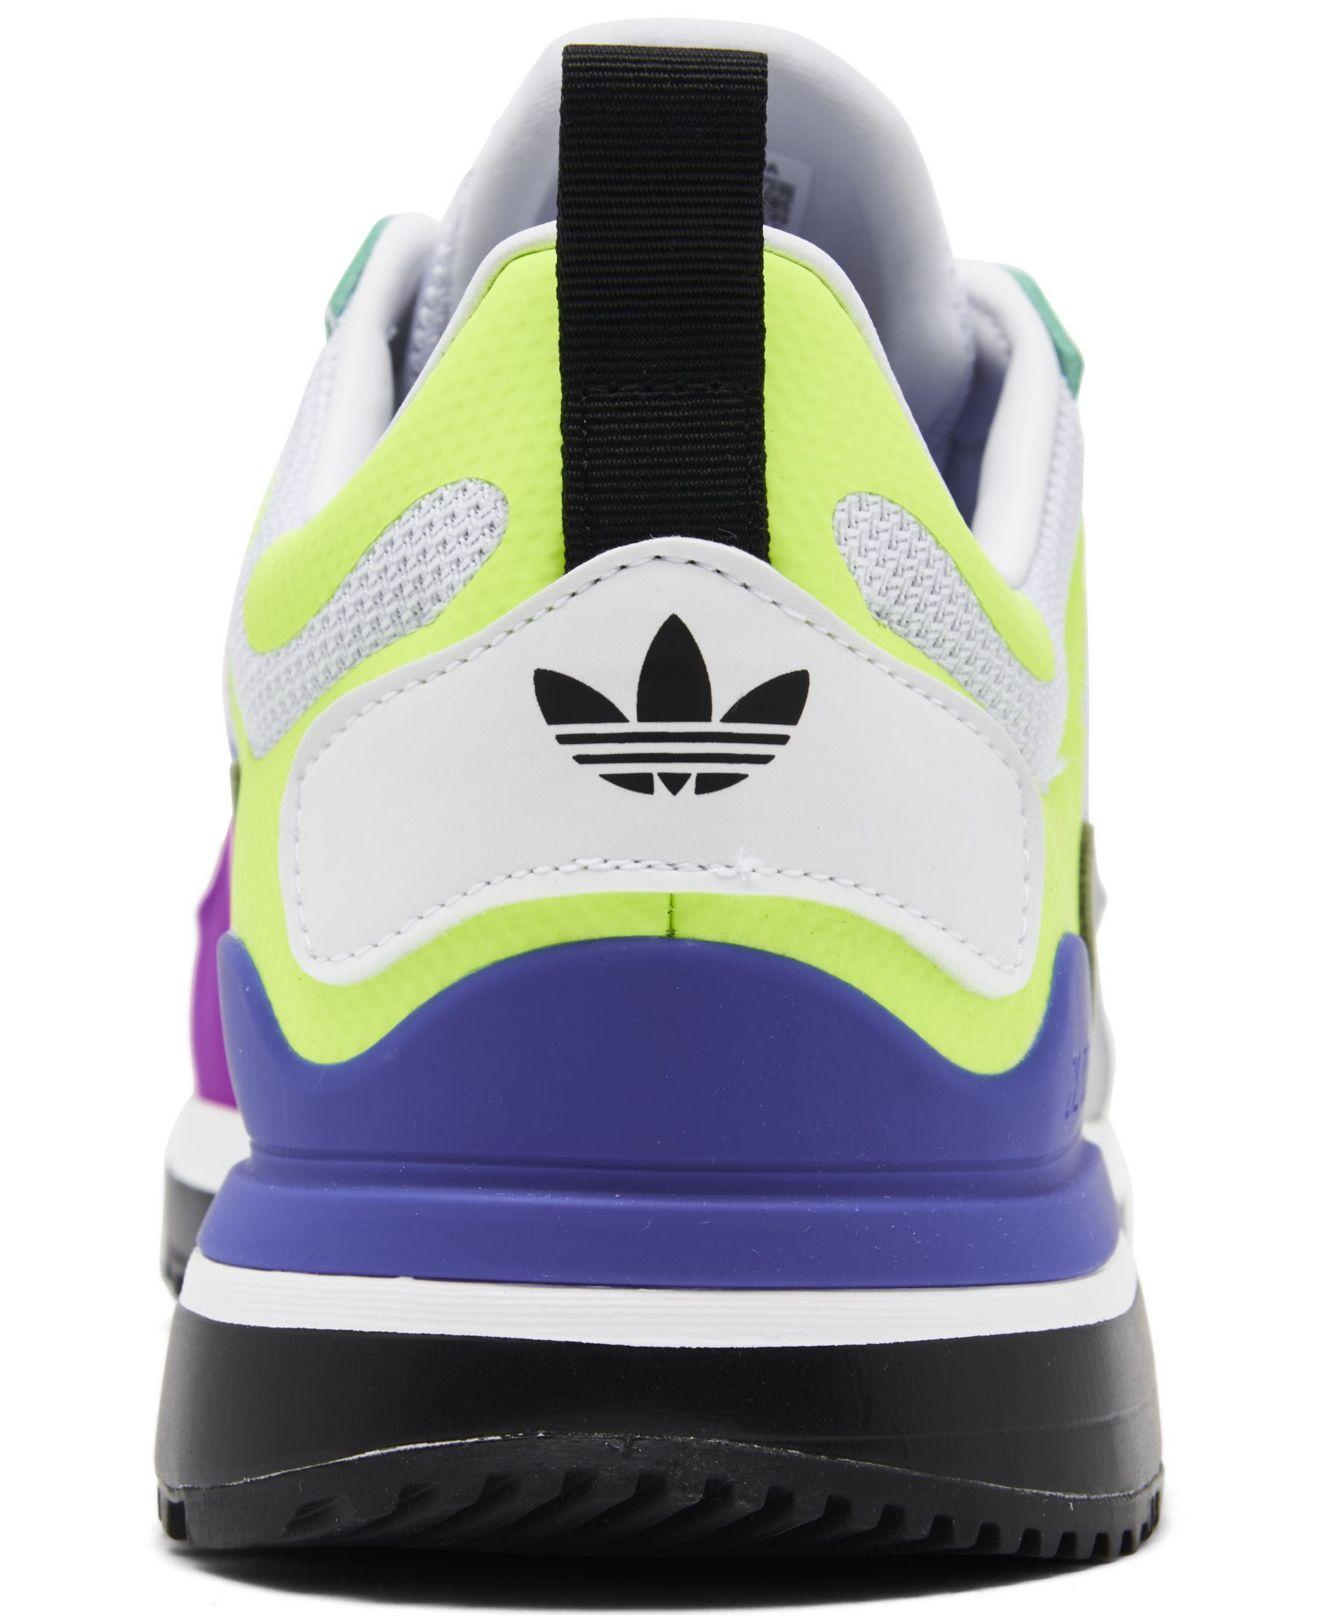 adidas Suede Zx 700 Hd Casual Sneakers From Finish Line in White ...